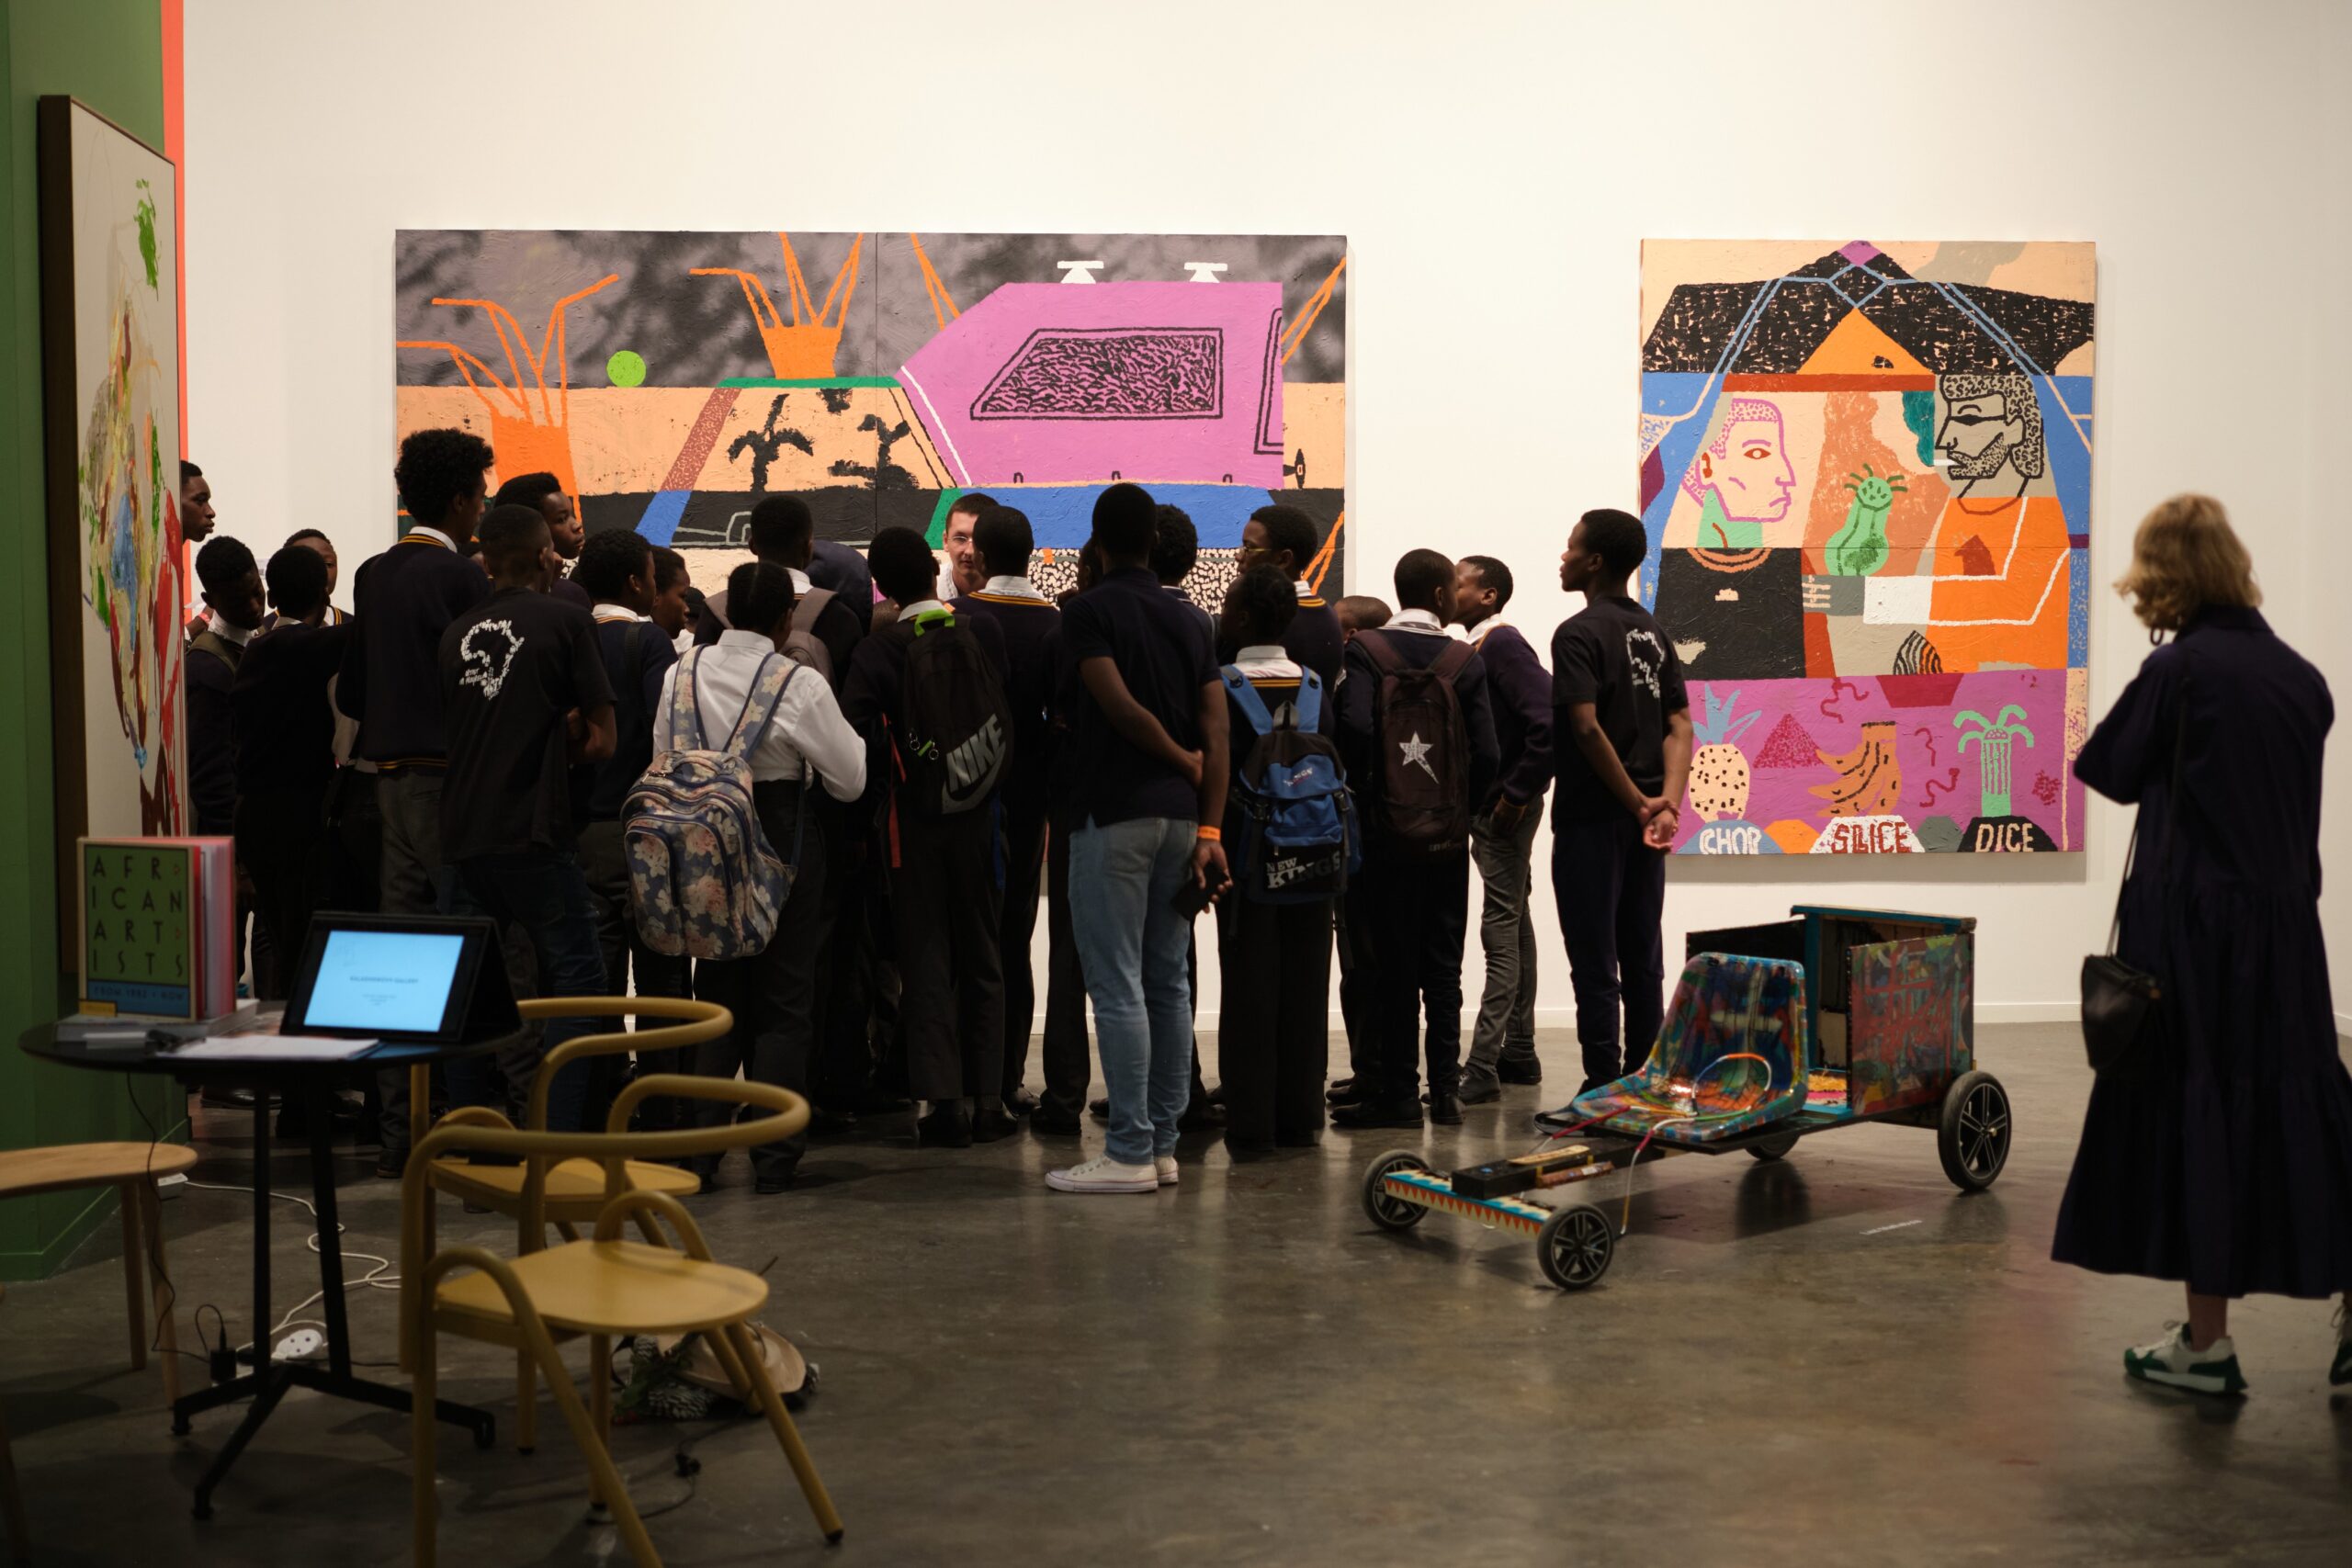 Students visit KALASHNIKOVV’s booth in the gallery HUB pavilion as a part of the educational programme during the 15th edition of FNB Art Joburg. (Image courtesy of FNB Art Joburg)